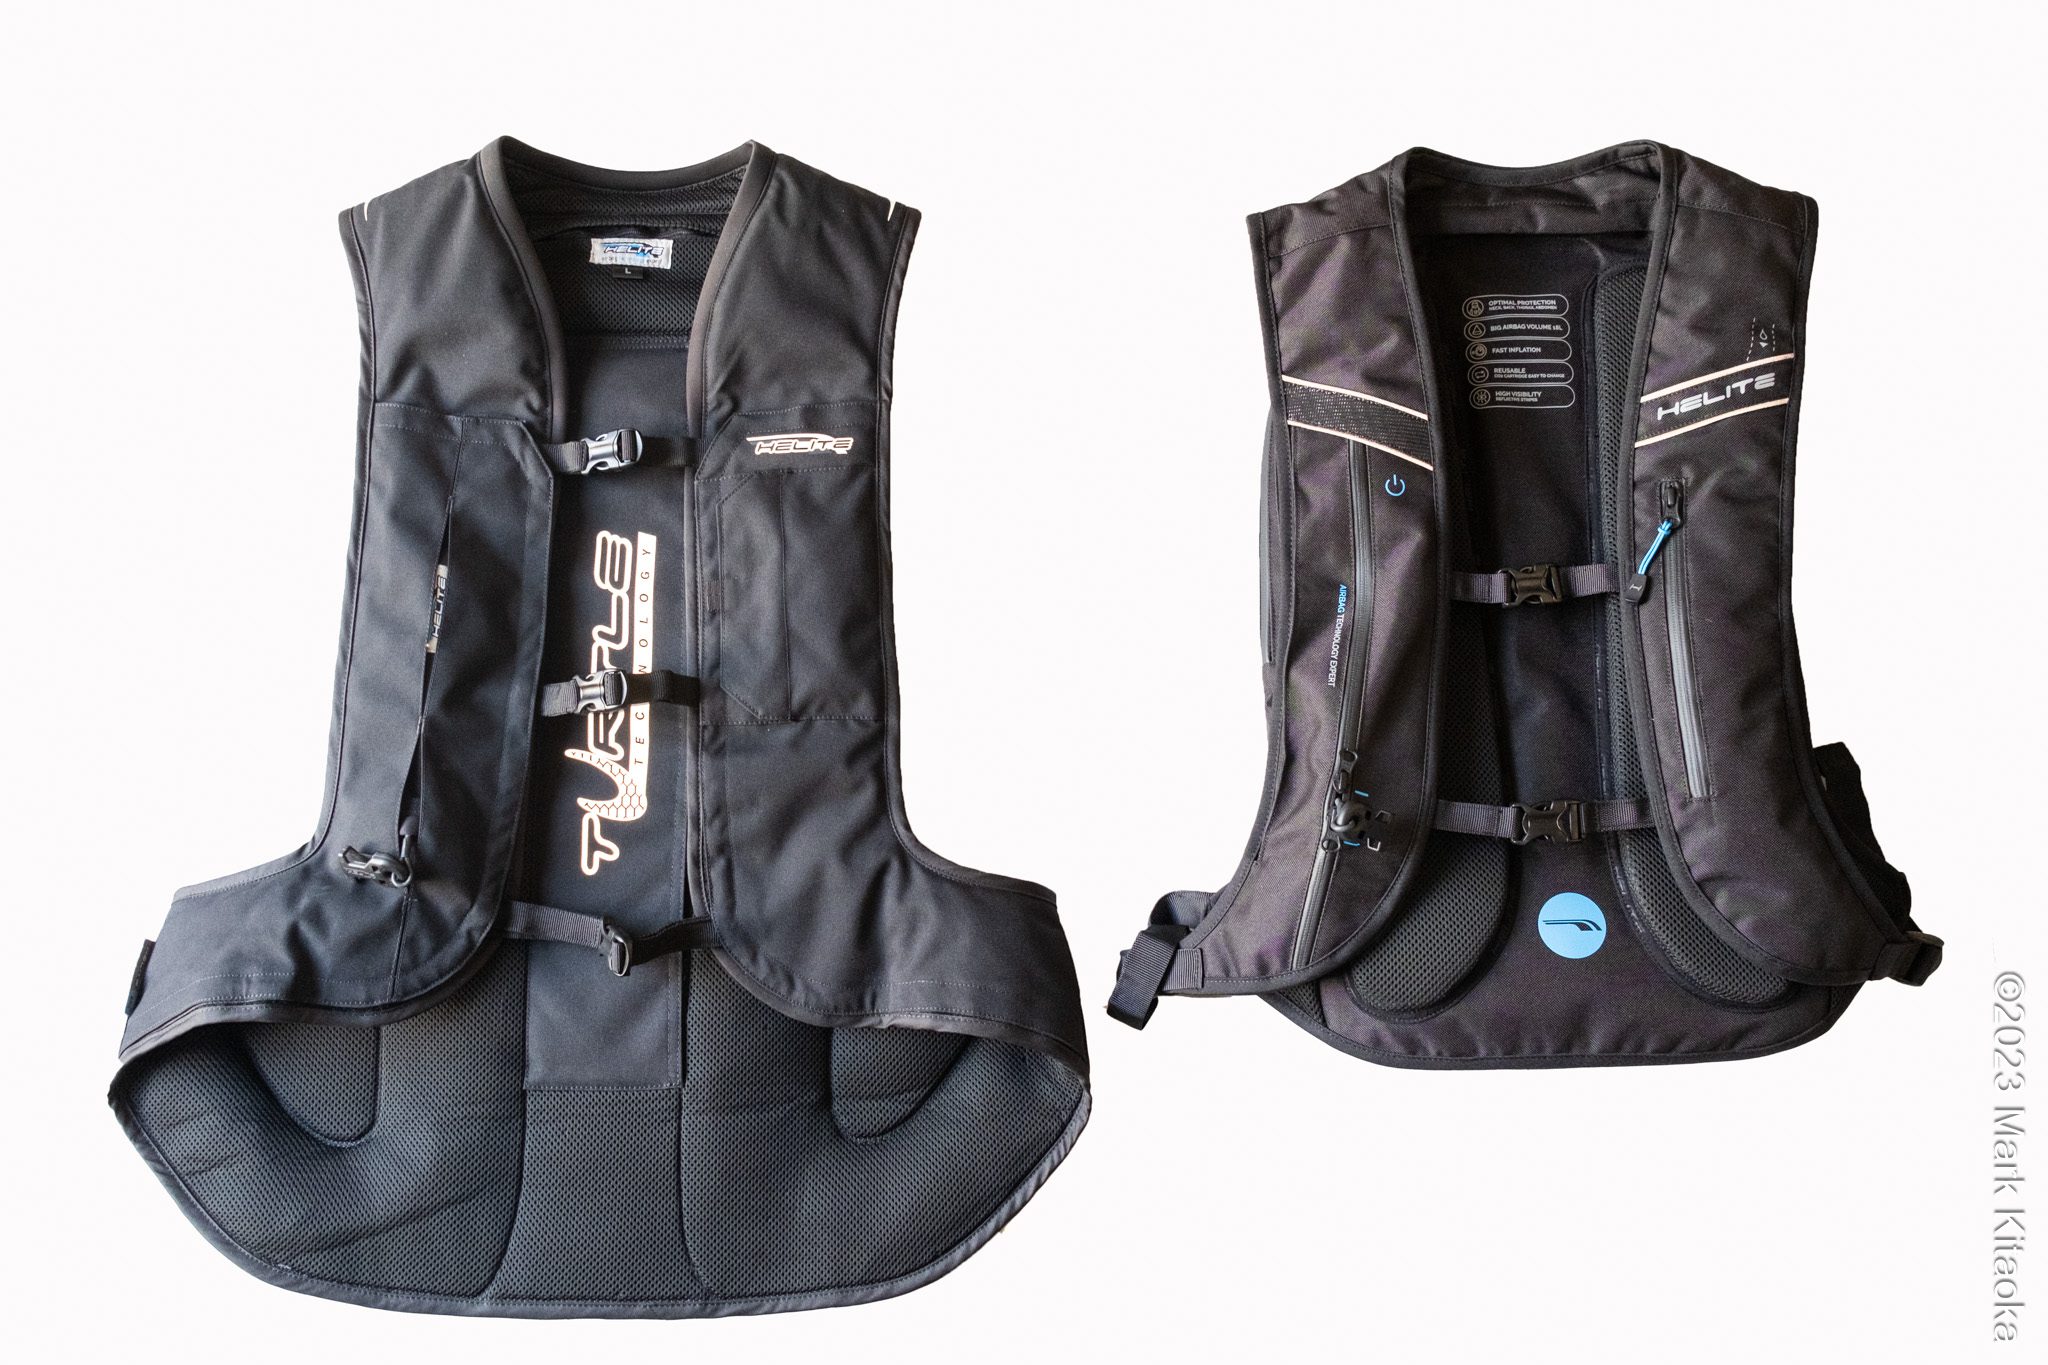 Front view of the airbag backpack